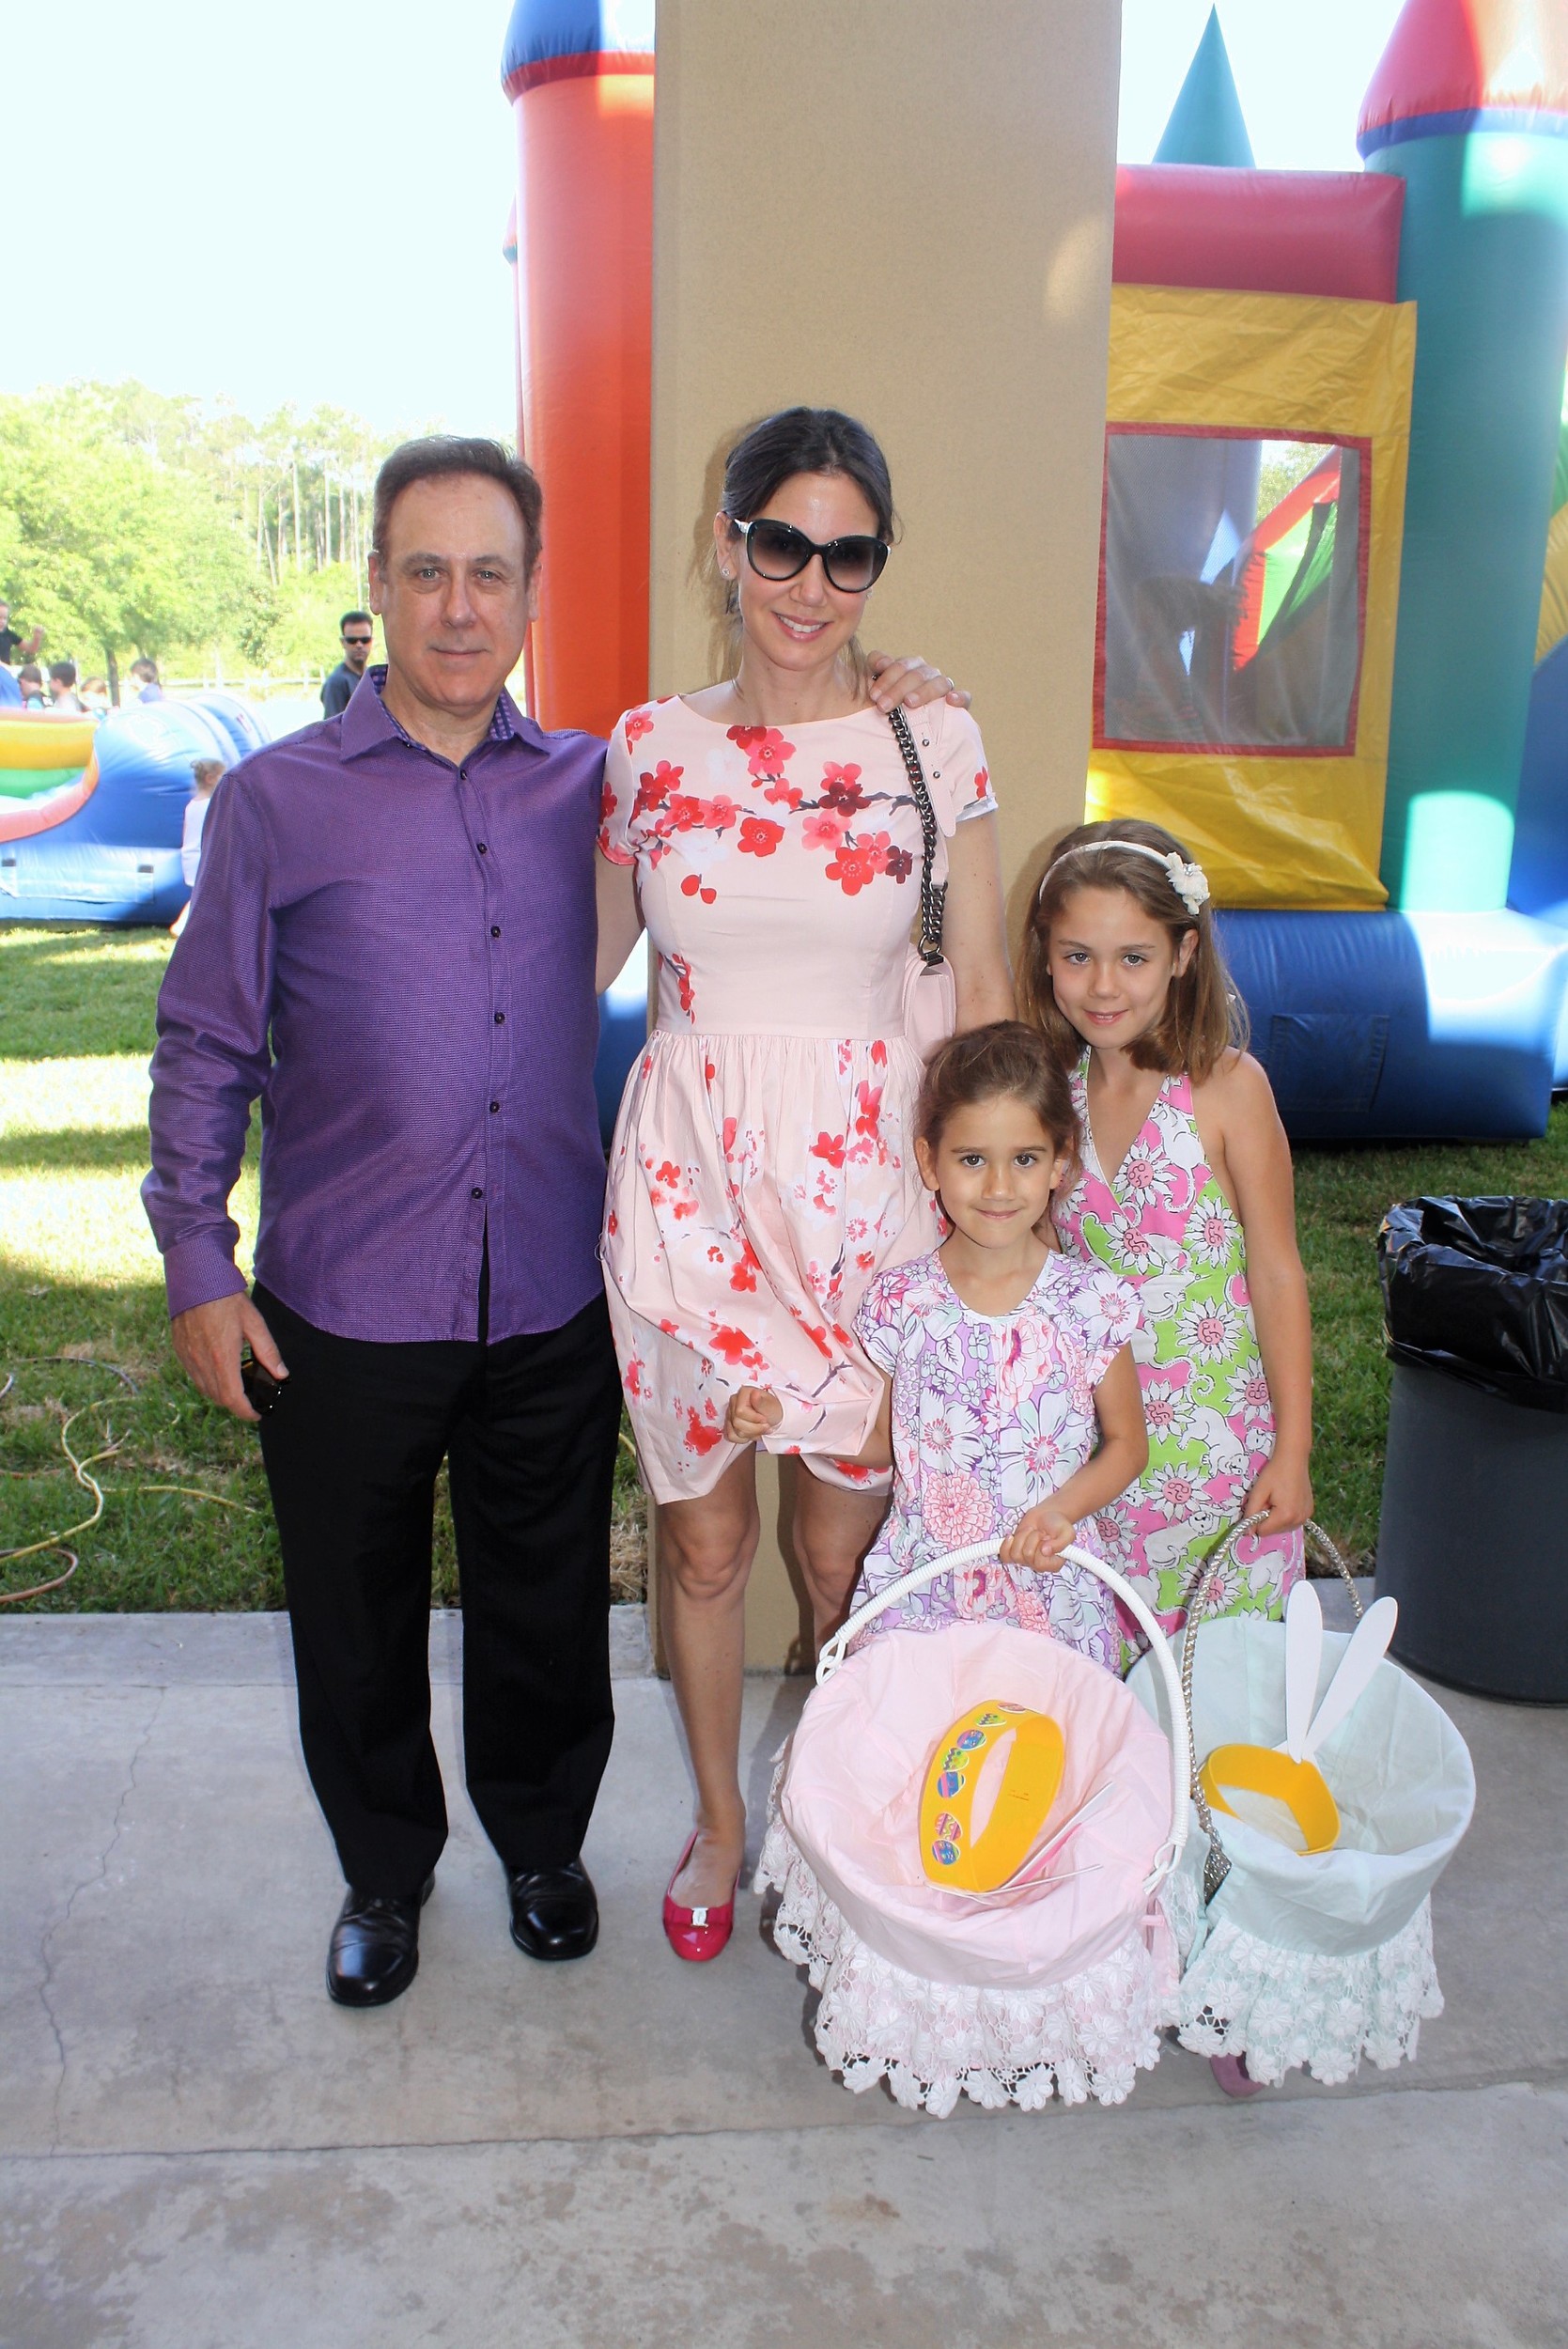 Larry and Monique Mucciarelli with daughters Elin, 6, and Anna, 9